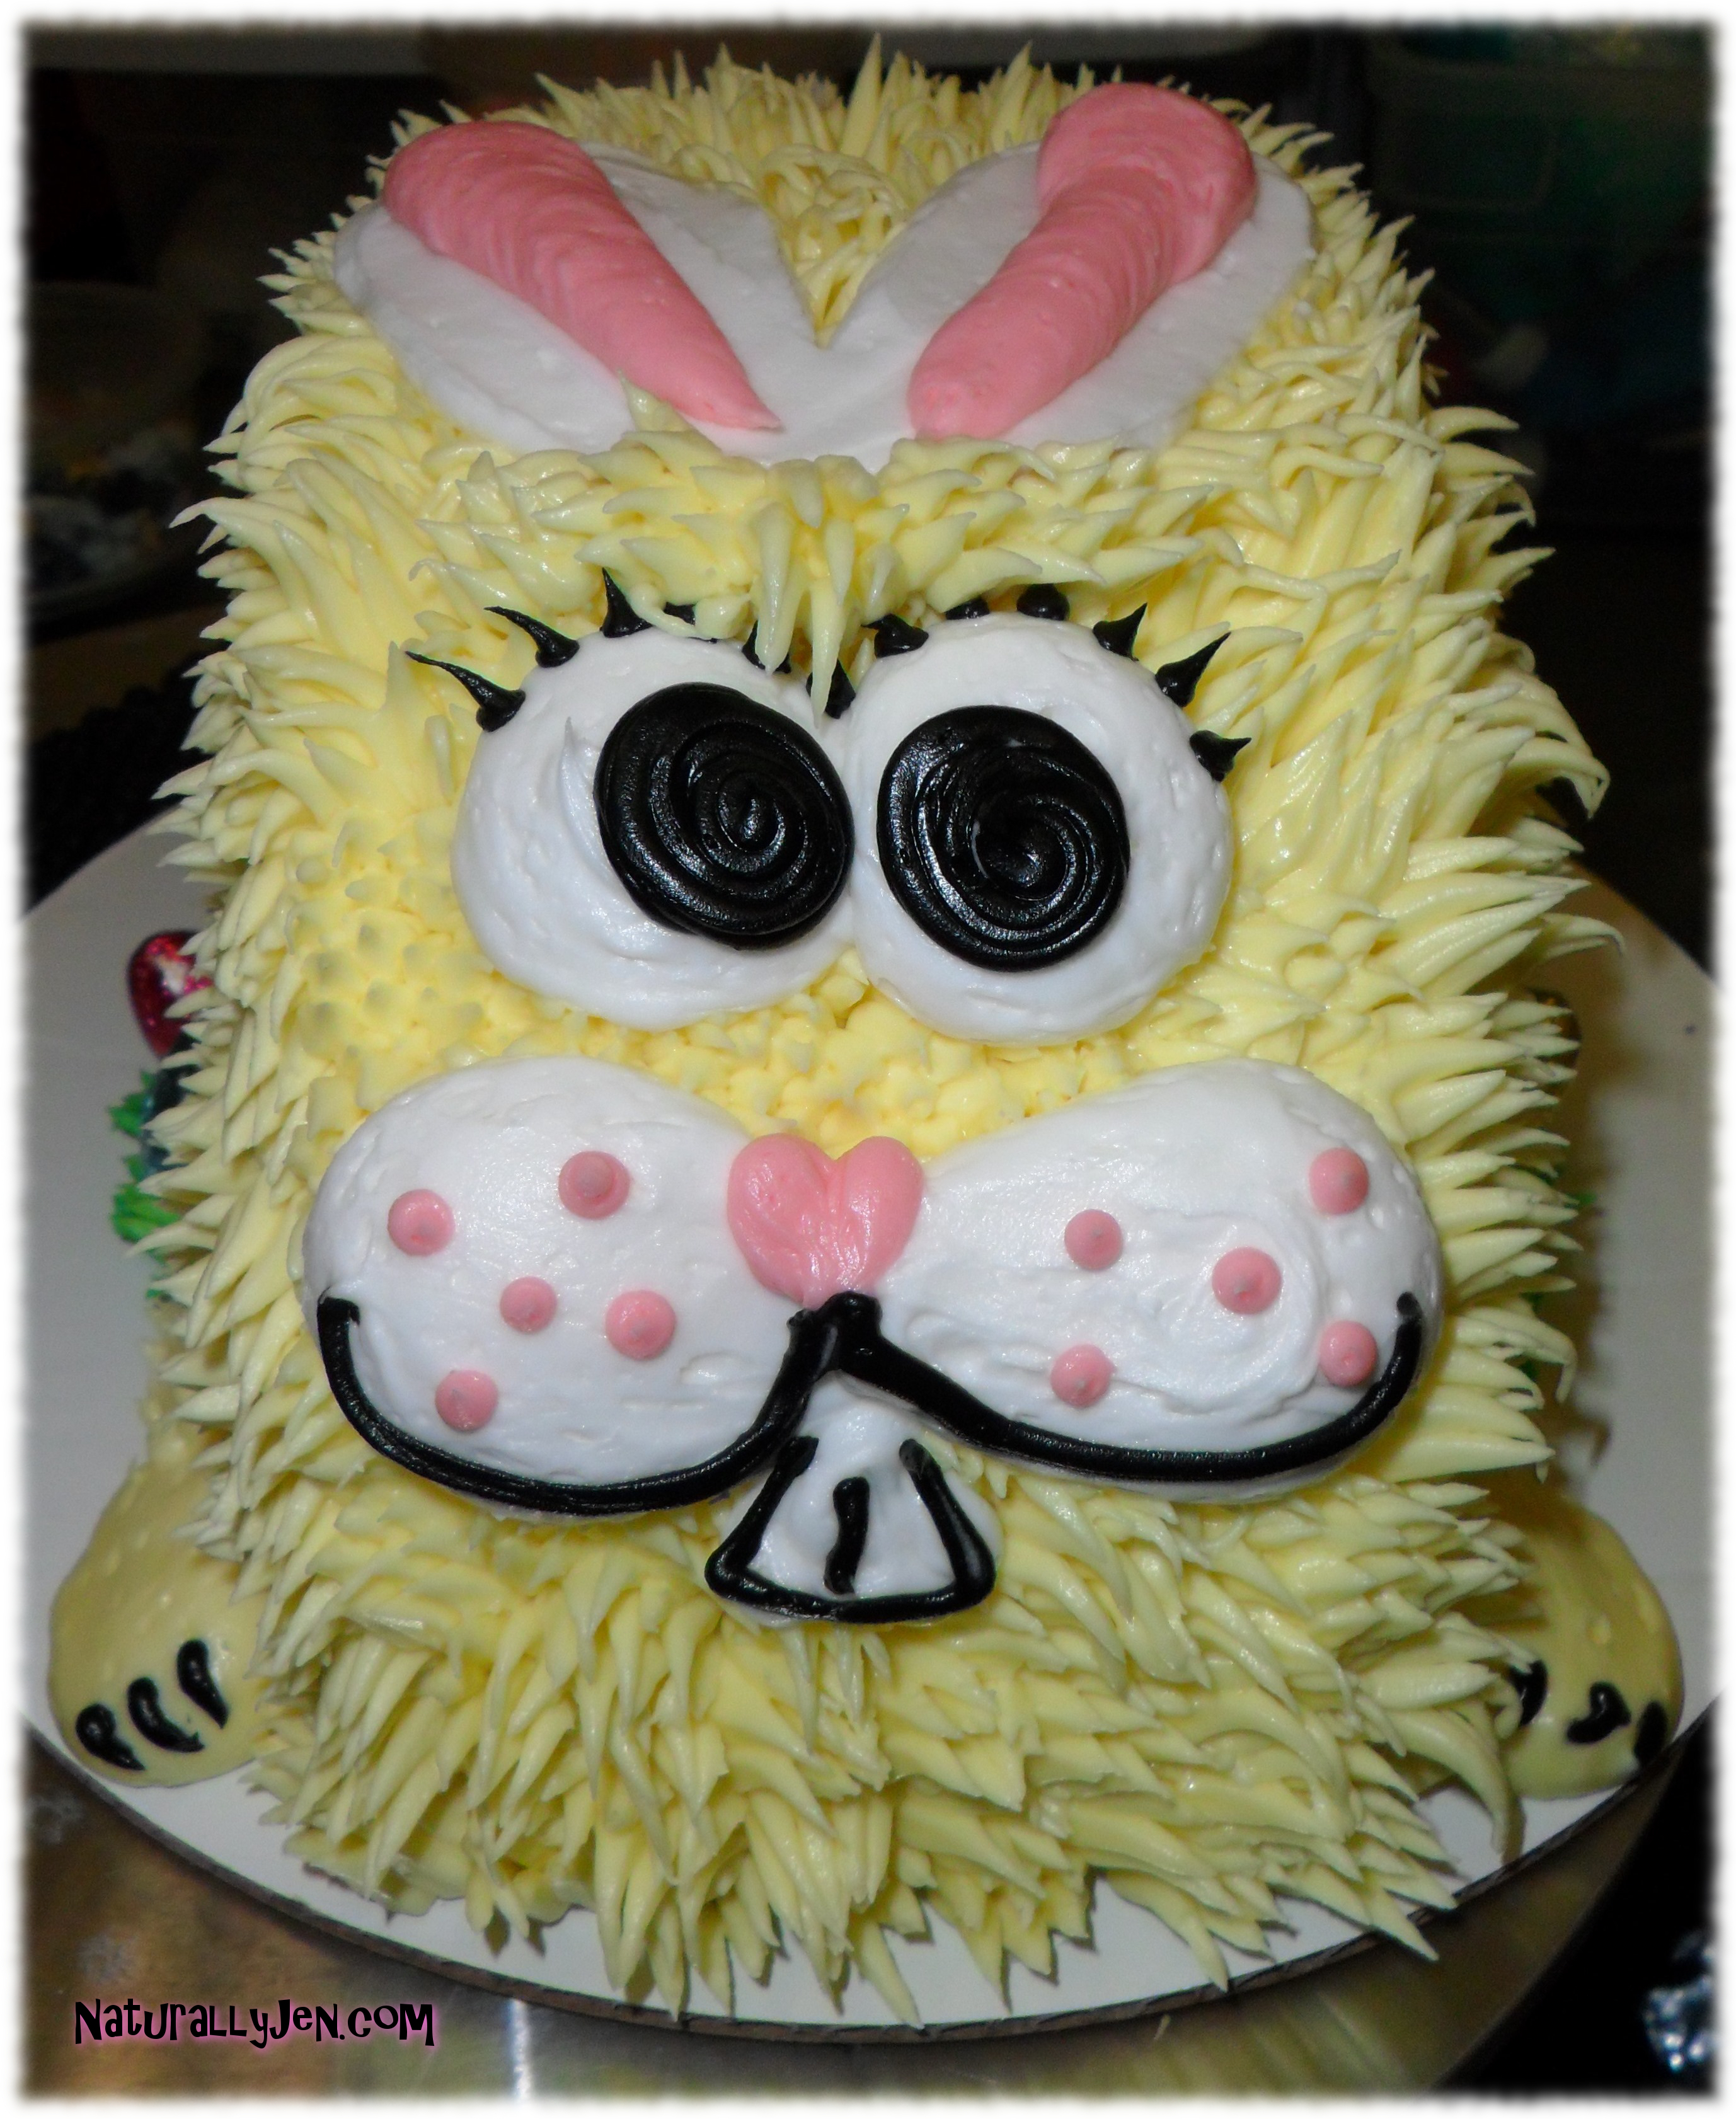 Shaped Easter Bunny Cake by Naturally Jen